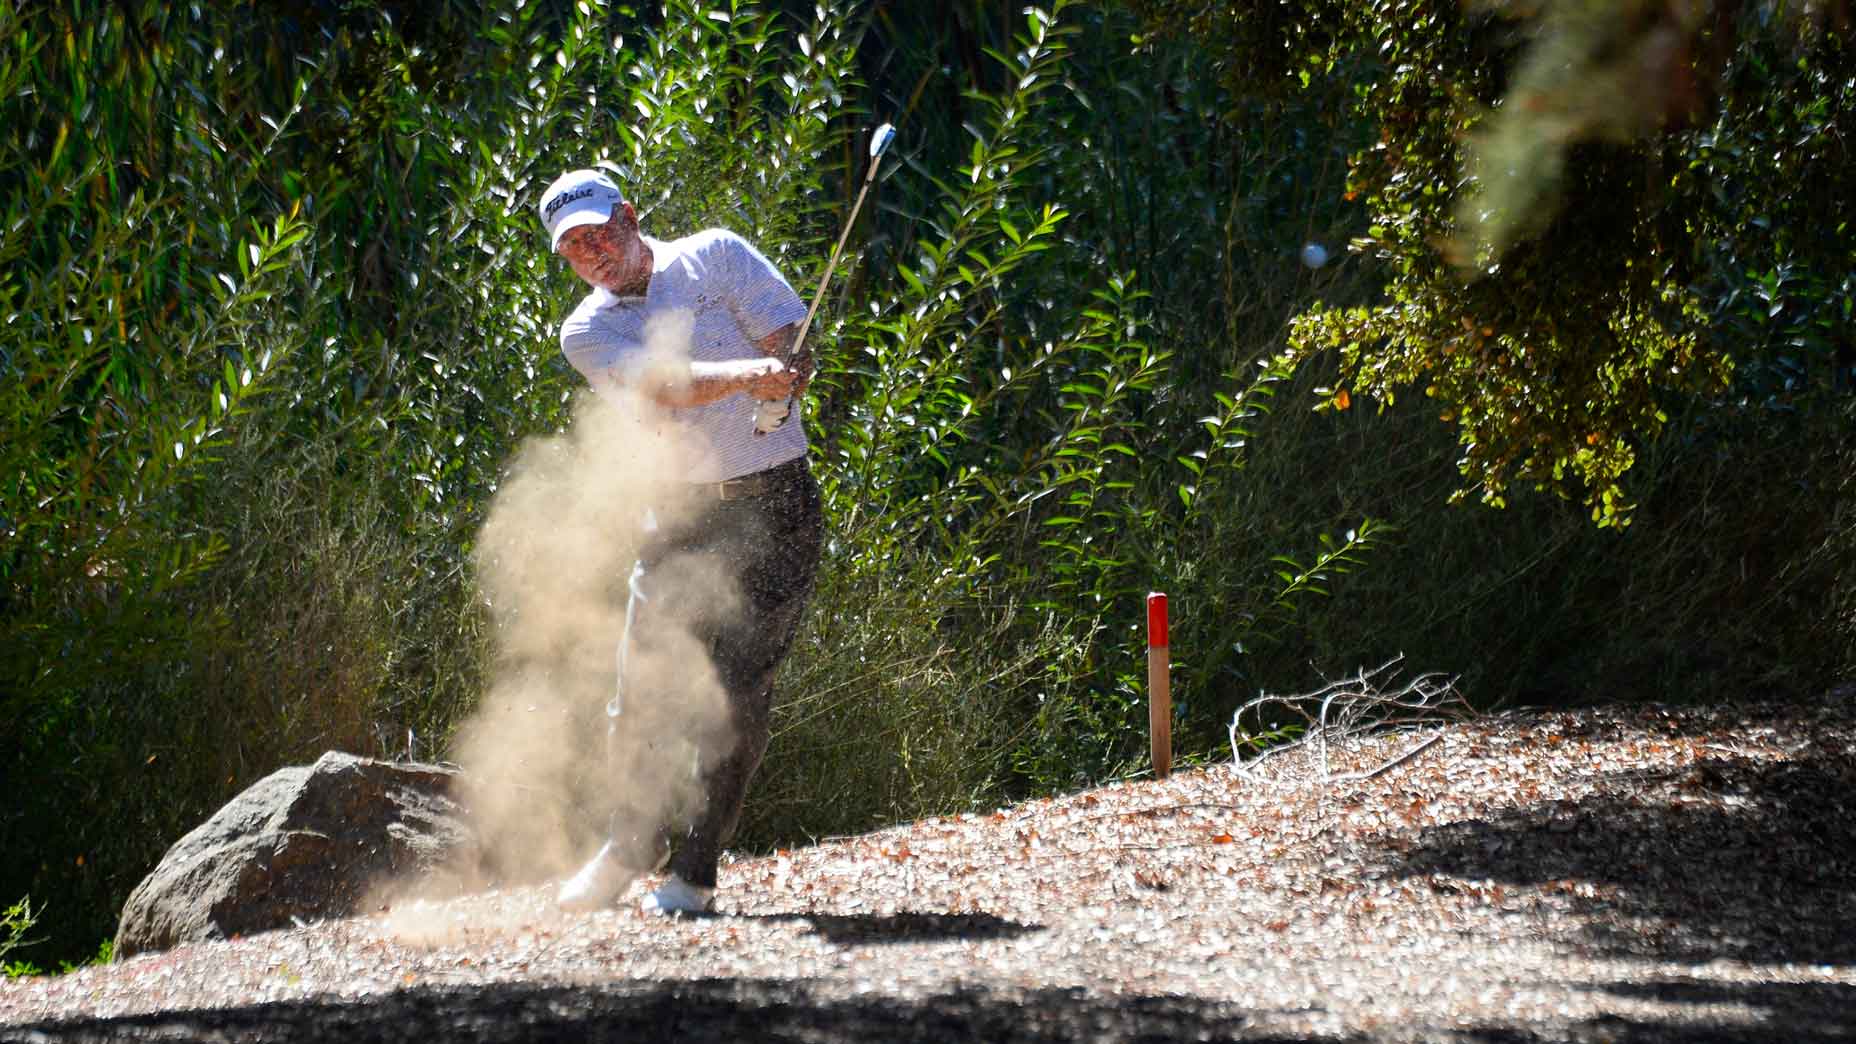 Pro golfer Jay Haas hits a shot out of a hazard on the first hole during the final round of the PGA Champions Tour 2018 Invesco QQQ Championship at the Sherwood Country Club on October 28, 2018